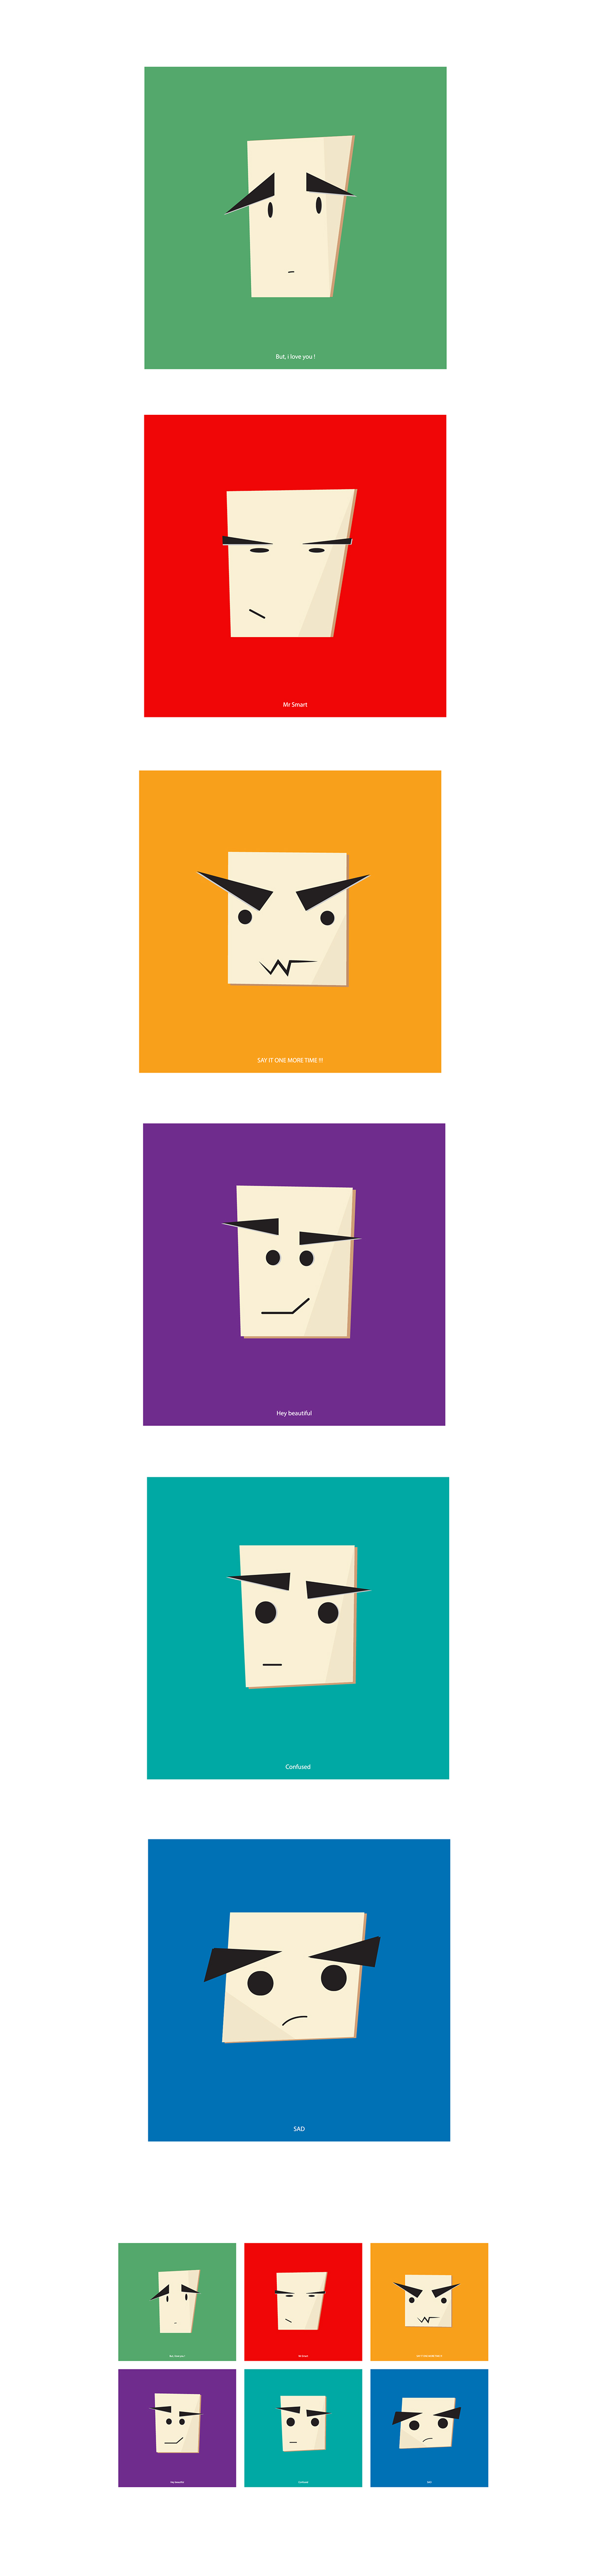 faces express see You One people colors life face square circles daily simple abstract